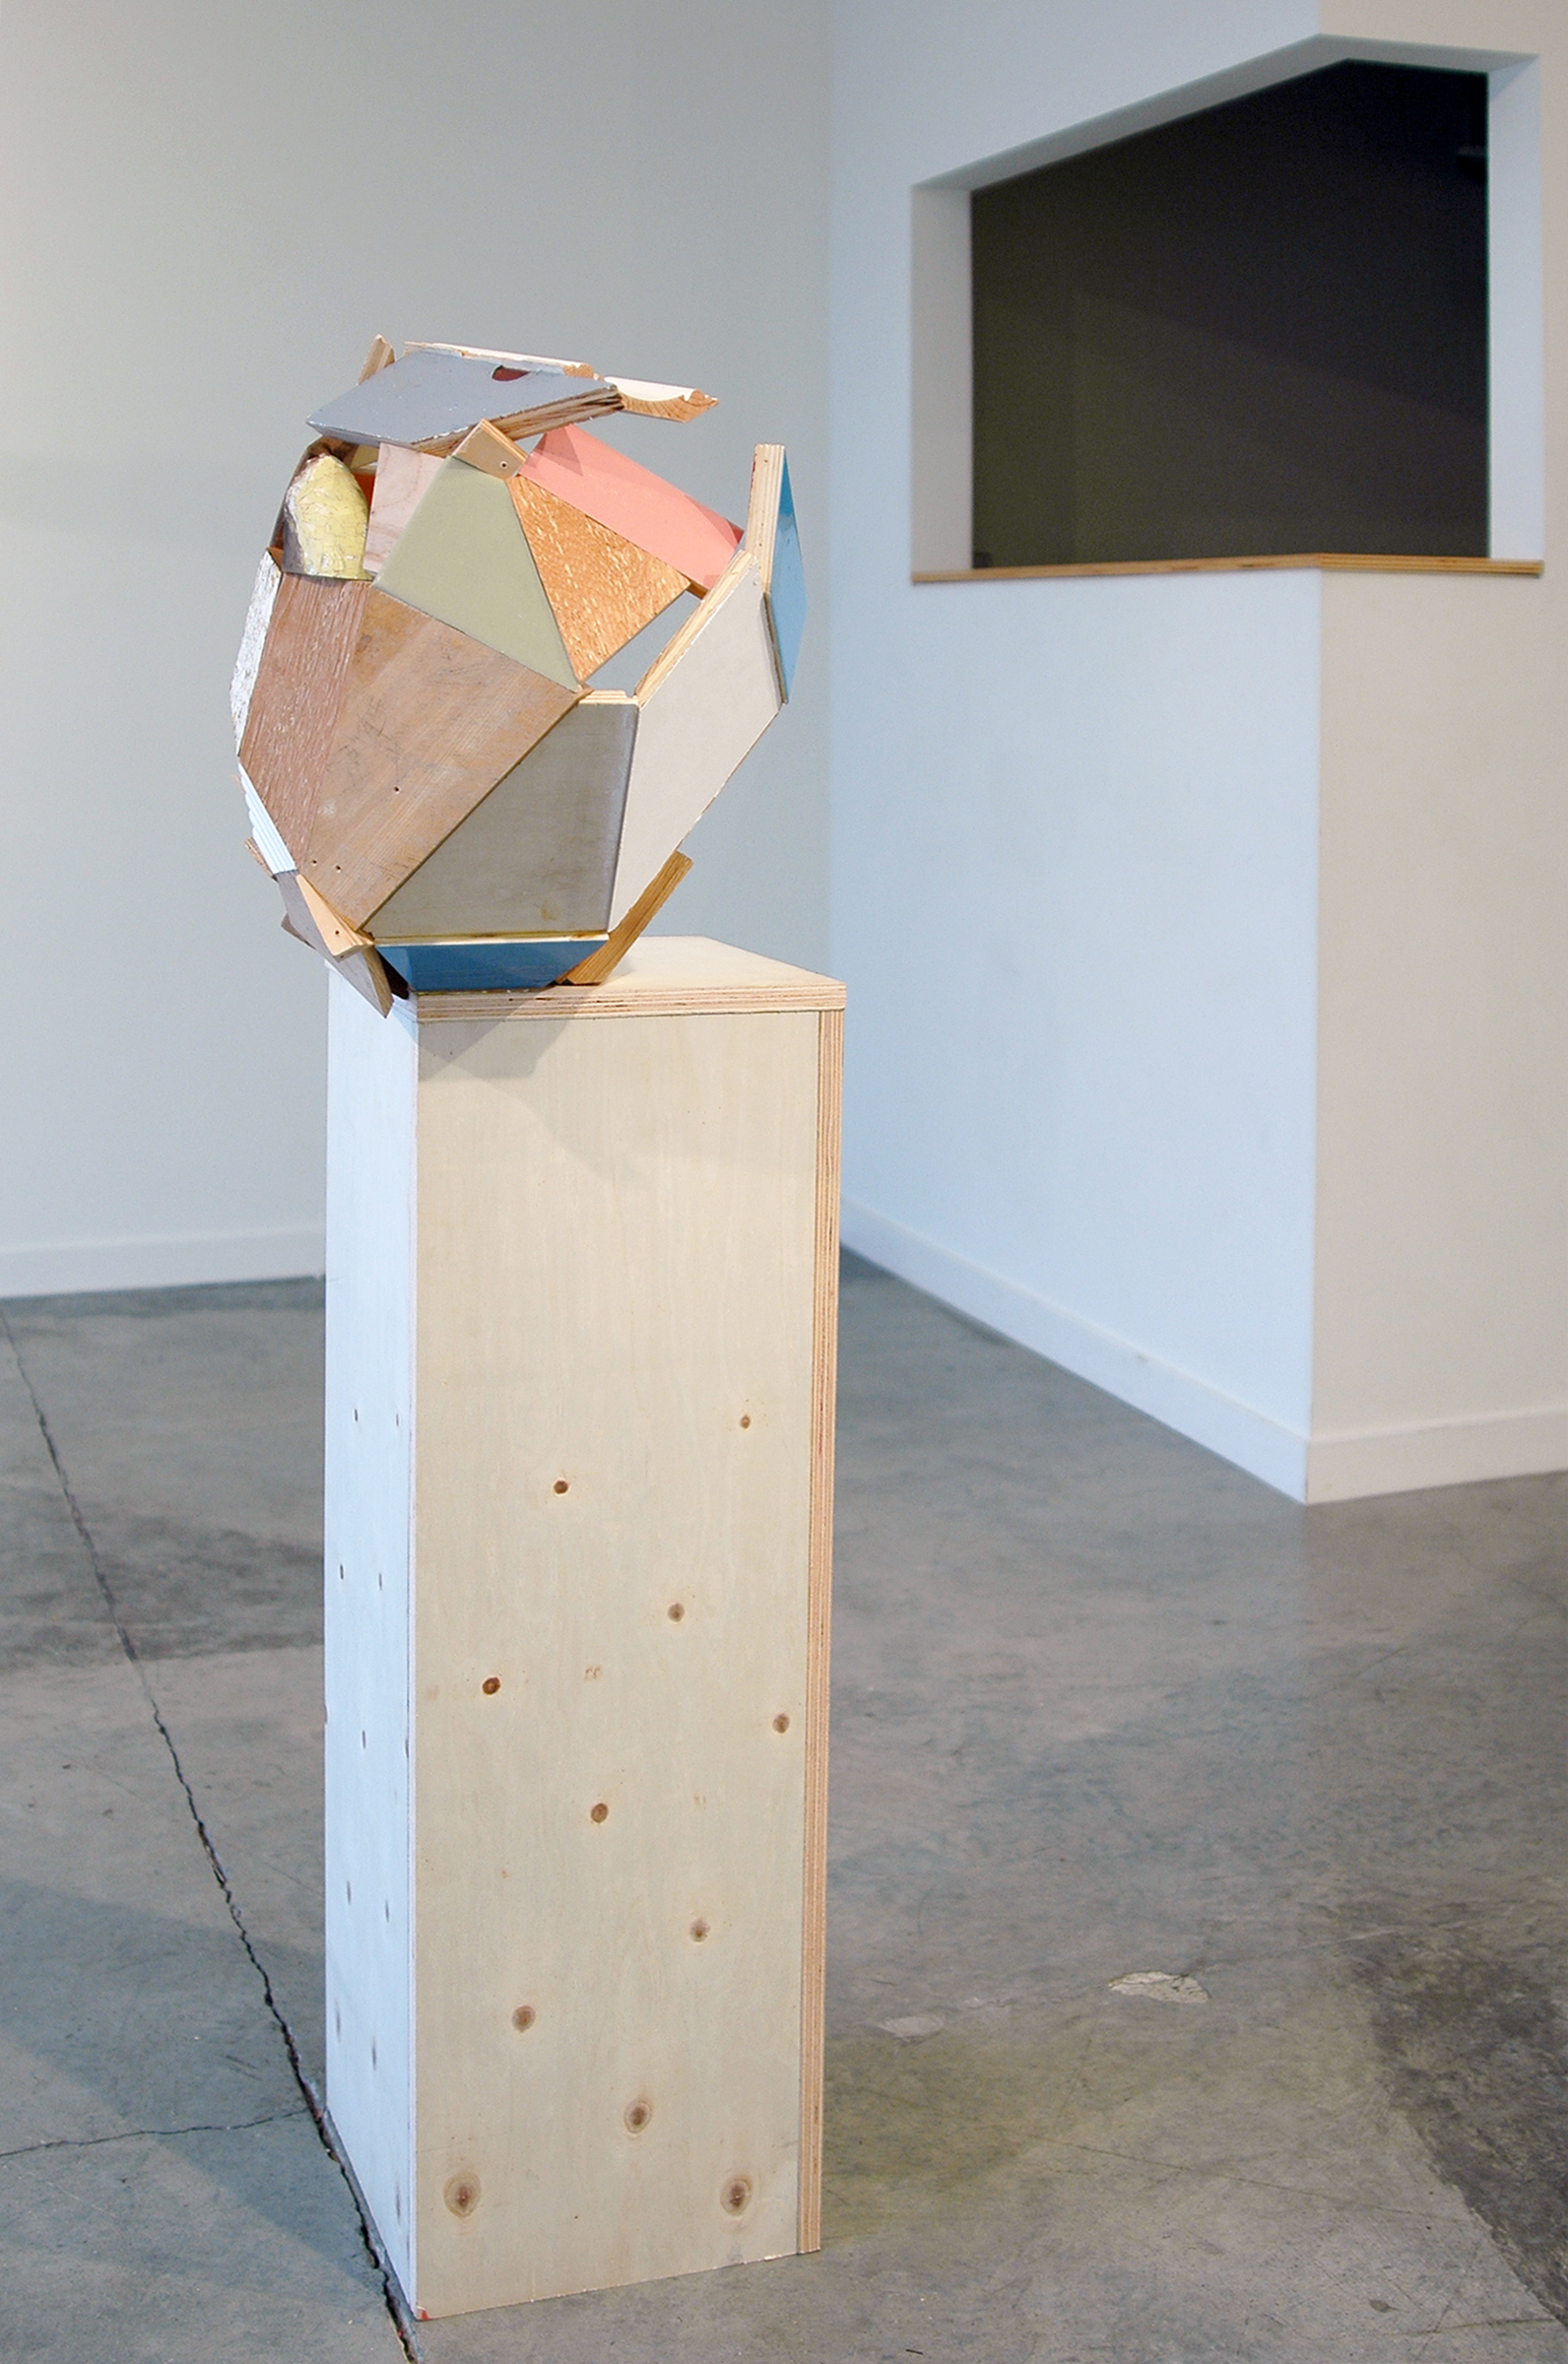   KIRK STOLLER   Untitled (ledge) , wood, acrylic and resin, 52" x 19.5" x 16.5" 